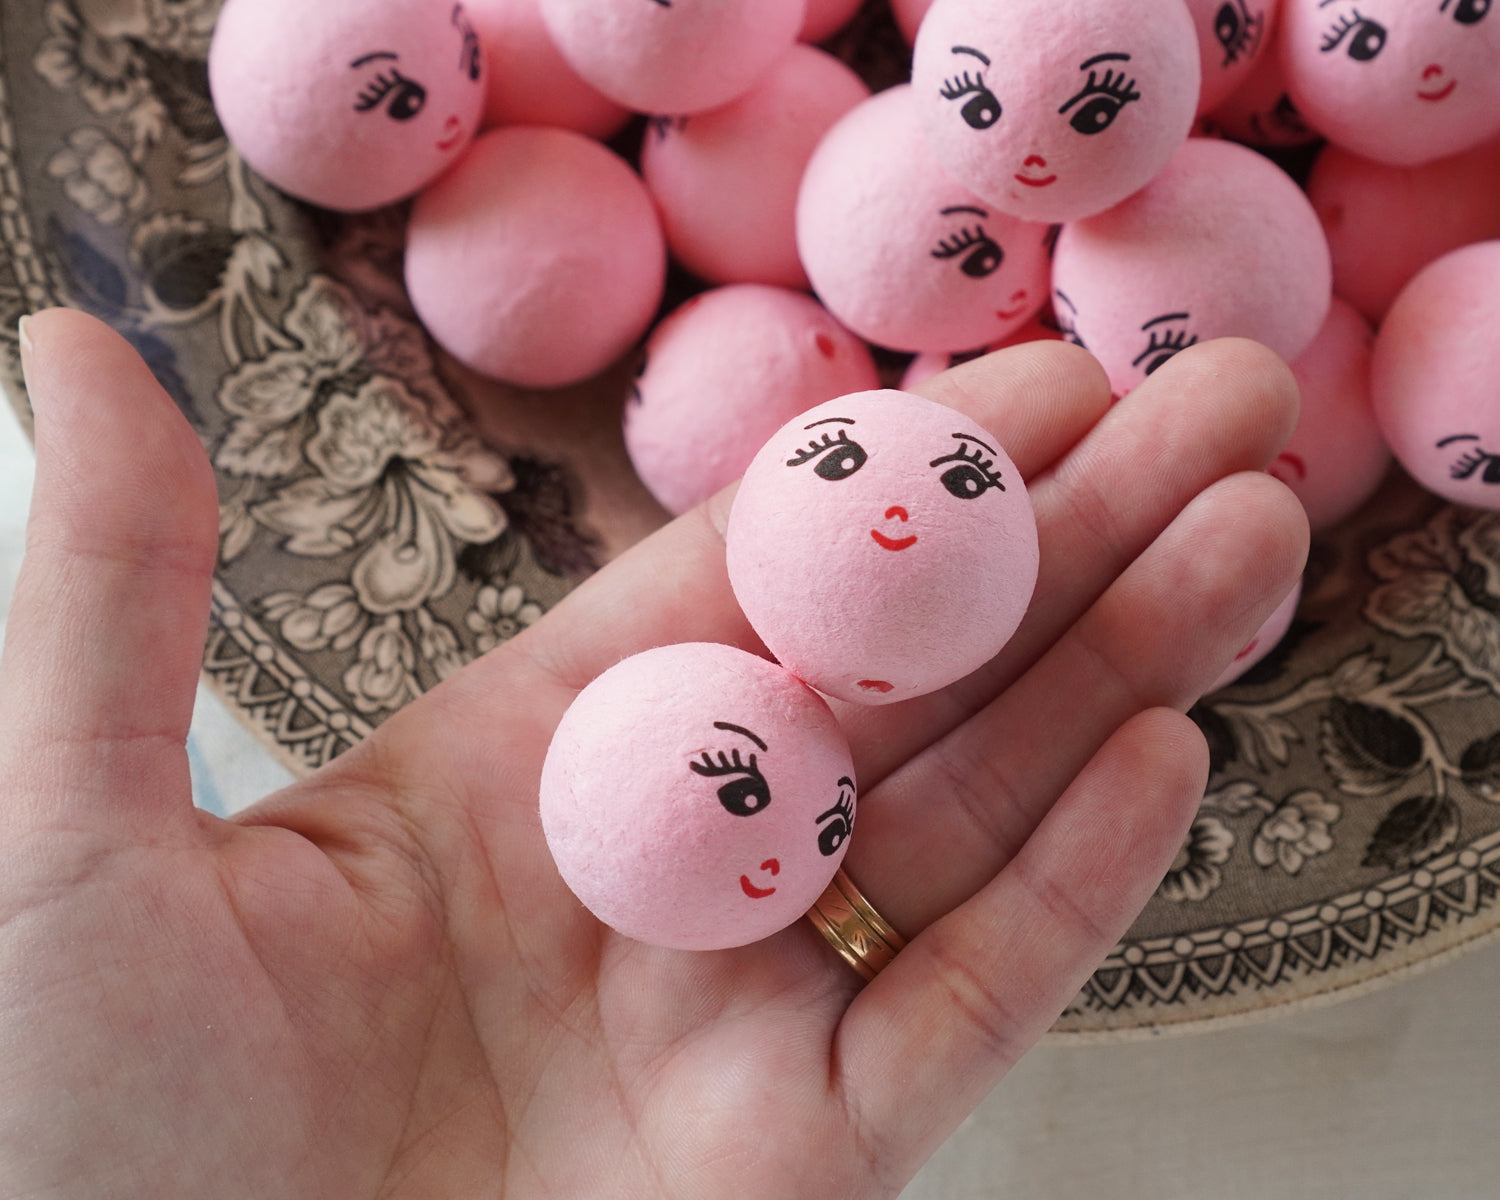 Pink Spun Cotton Heads: CHARM - 30mm Vintage-Style Cotton Doll Heads with Faces, 12 Pcs.